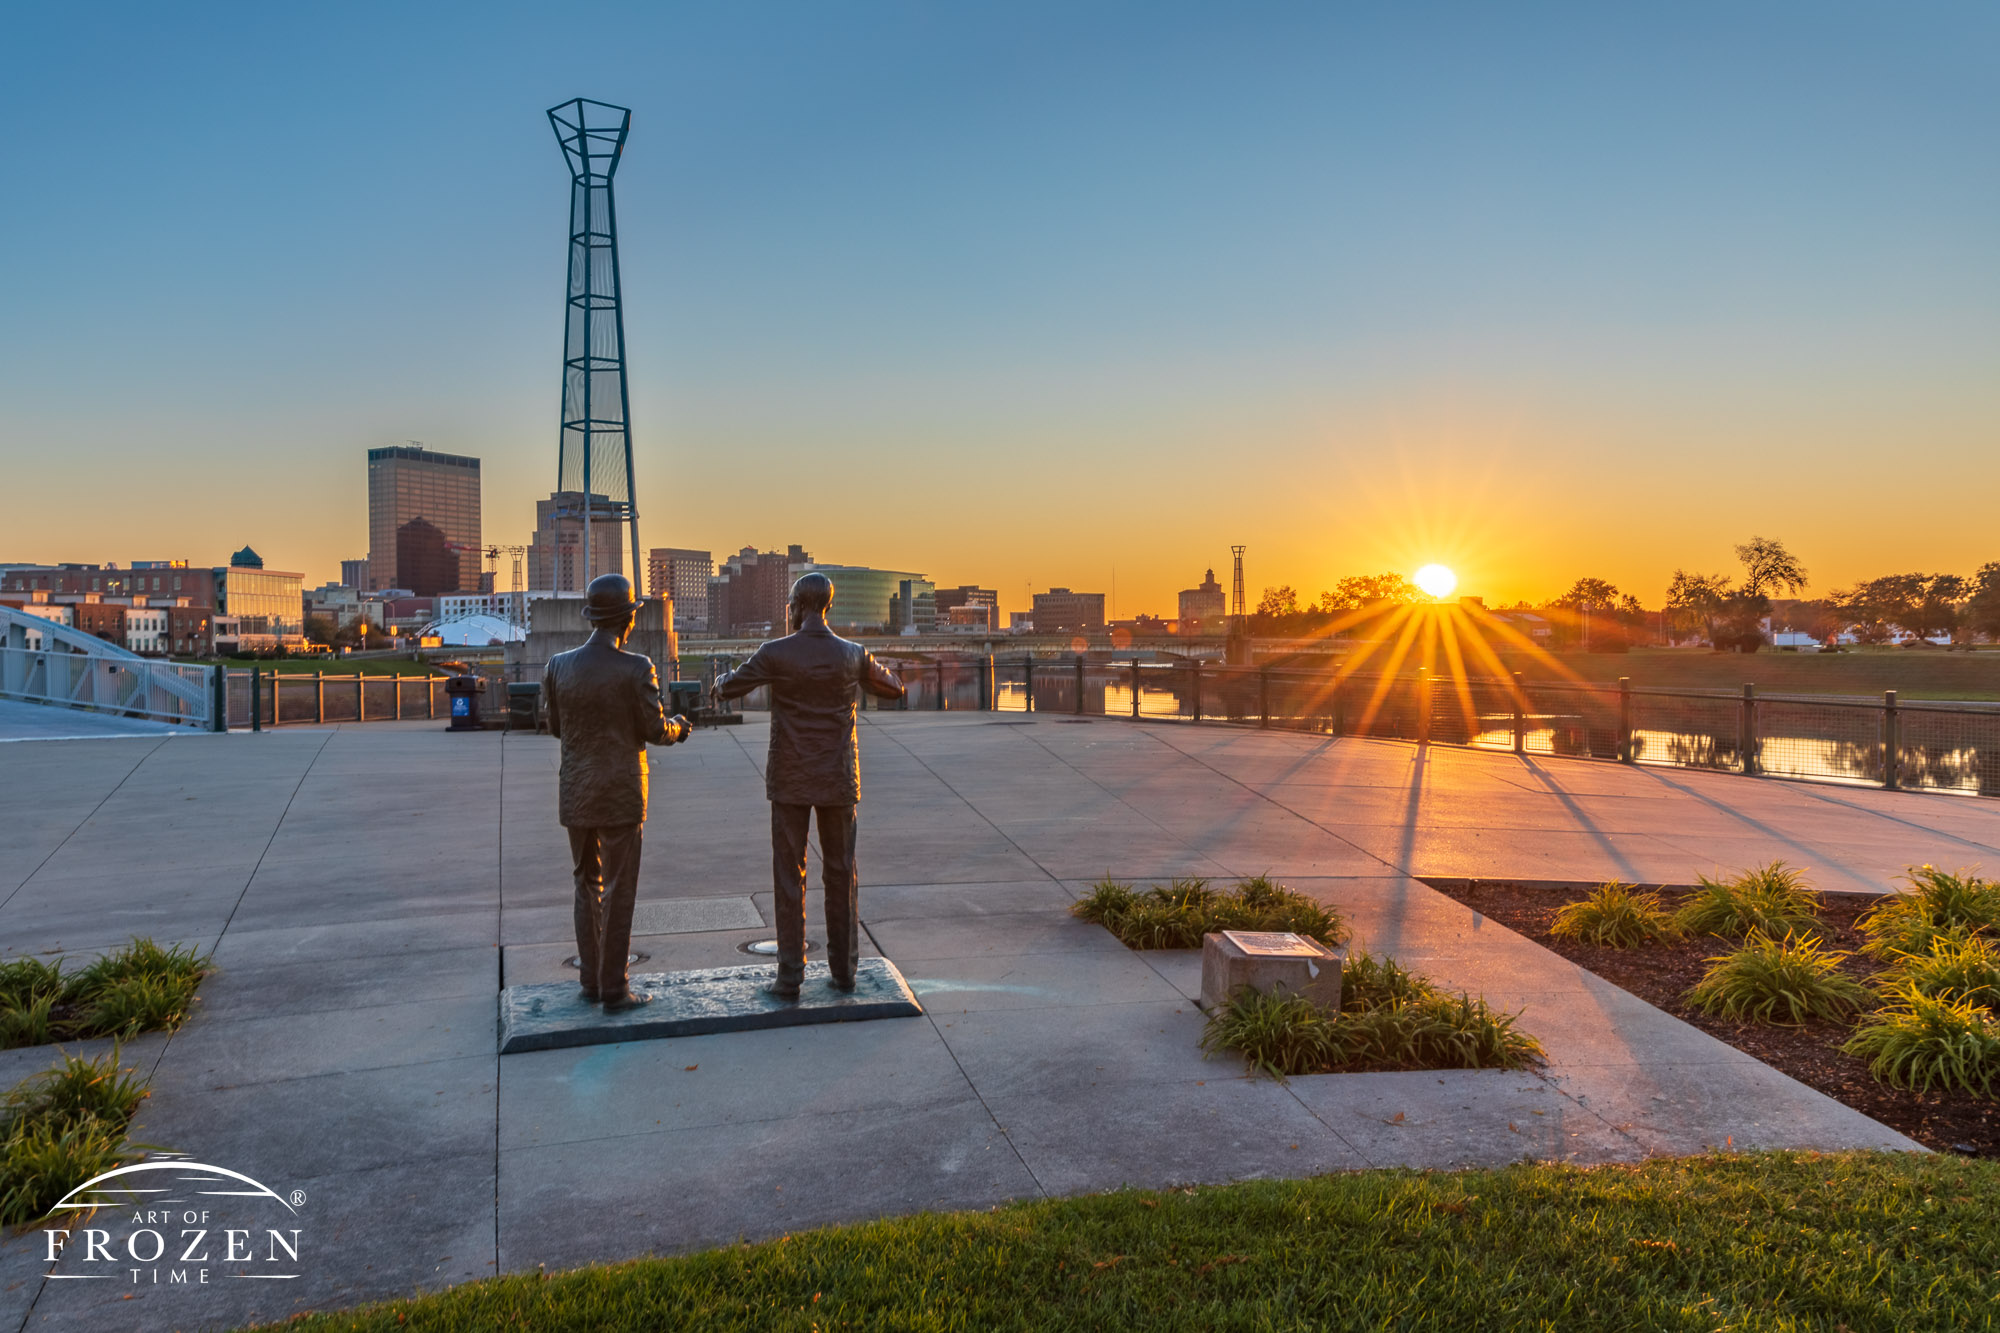 A statue of the Wright Brother looking west as the setting sun rakes light across the Dayton Skyline.